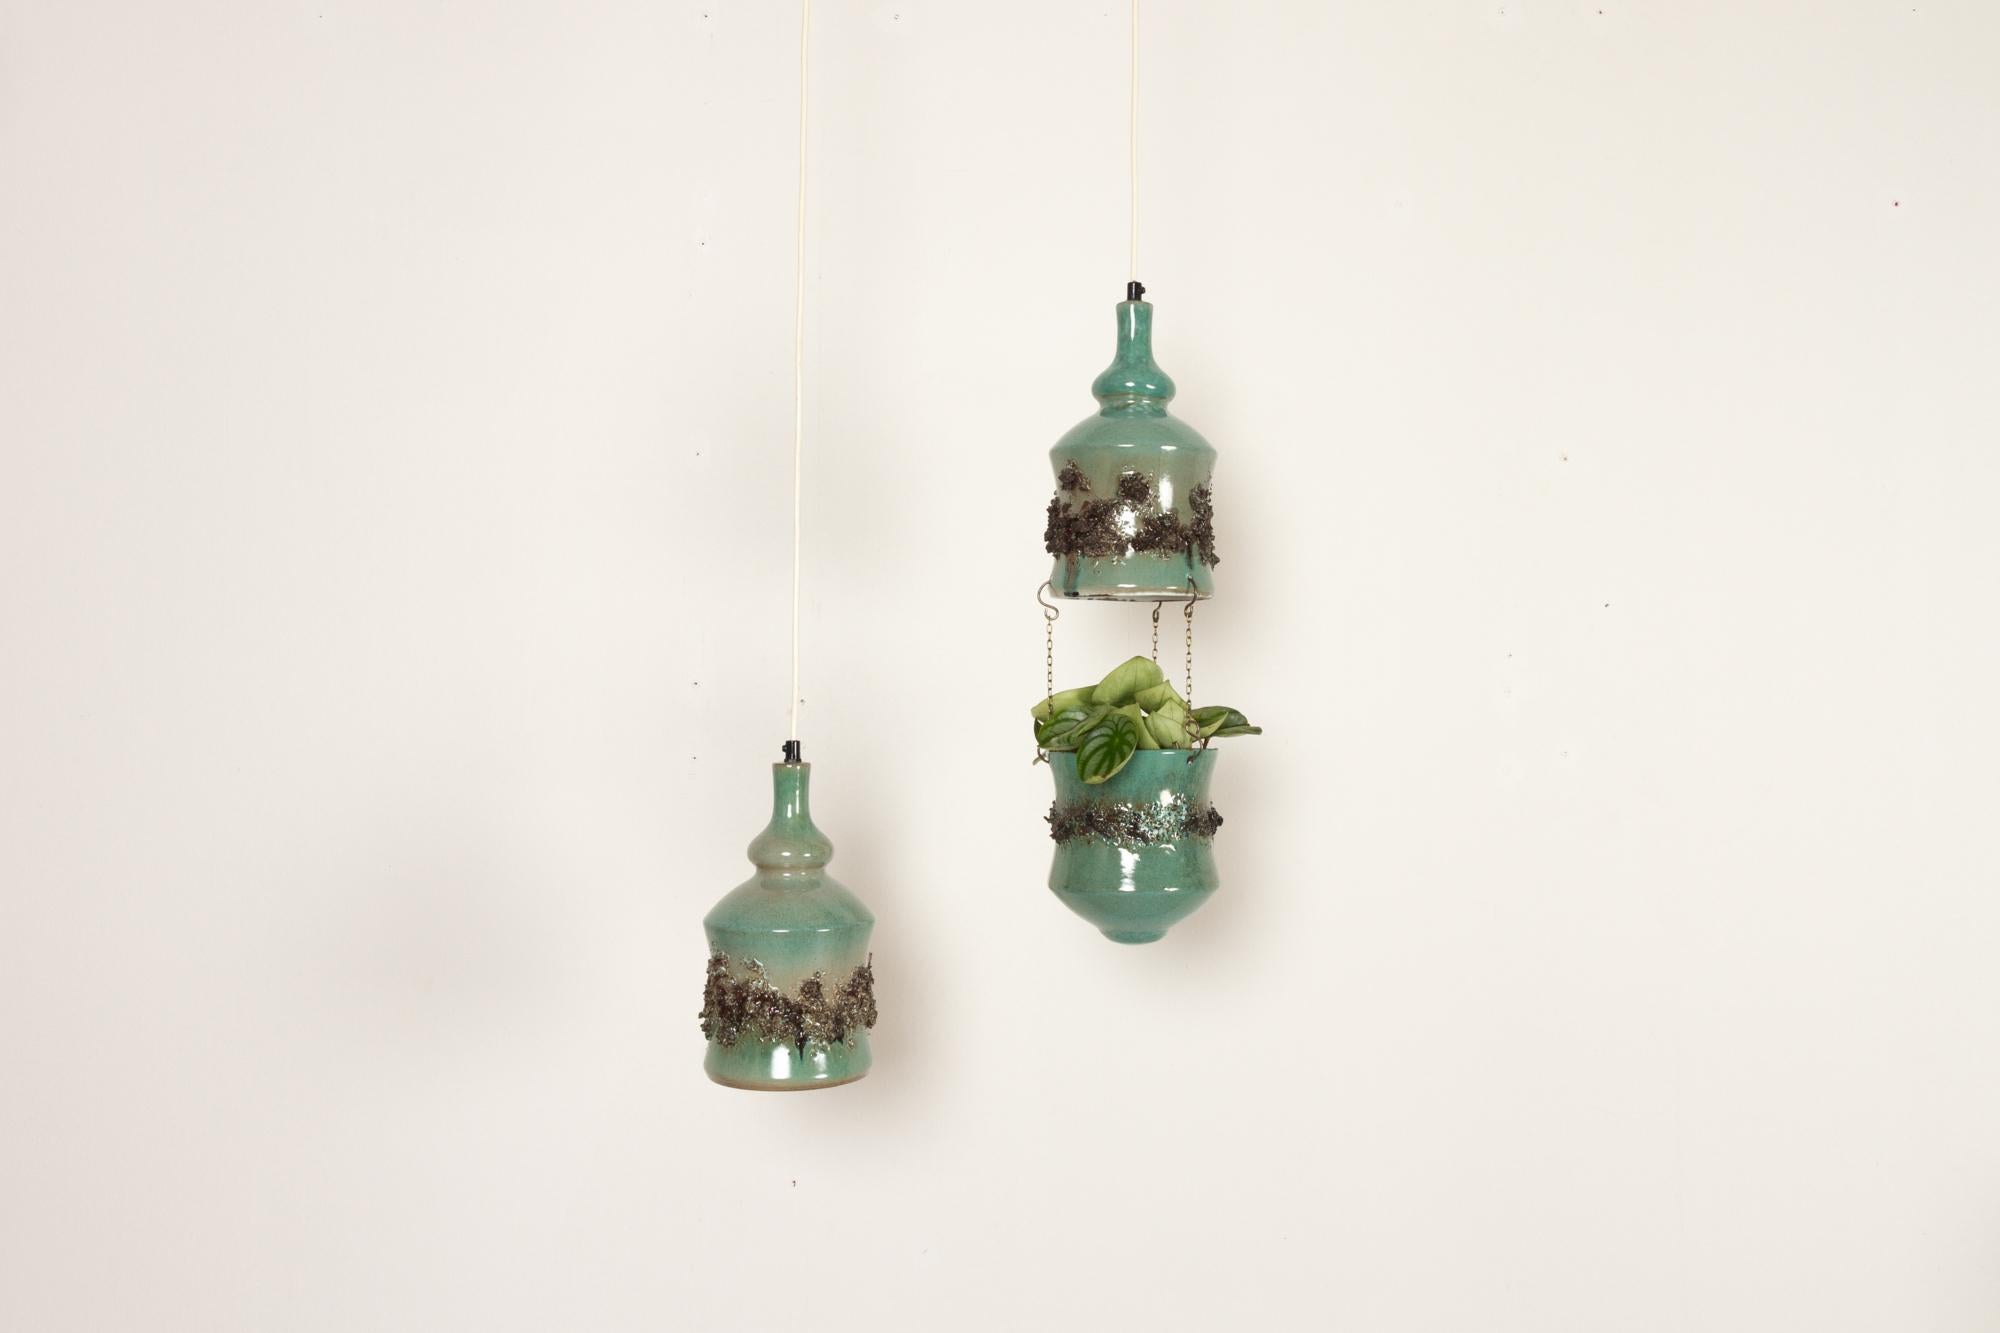 Vintage Danish ceramic pendants and hanging flower pot 1960s 
Danish mid-century modern ceramic lamps in light green glaze. One lamp has a matching flower pot suspended in brass chains. Inside of lamp and flower has a white glaze.
E26/27 socket.